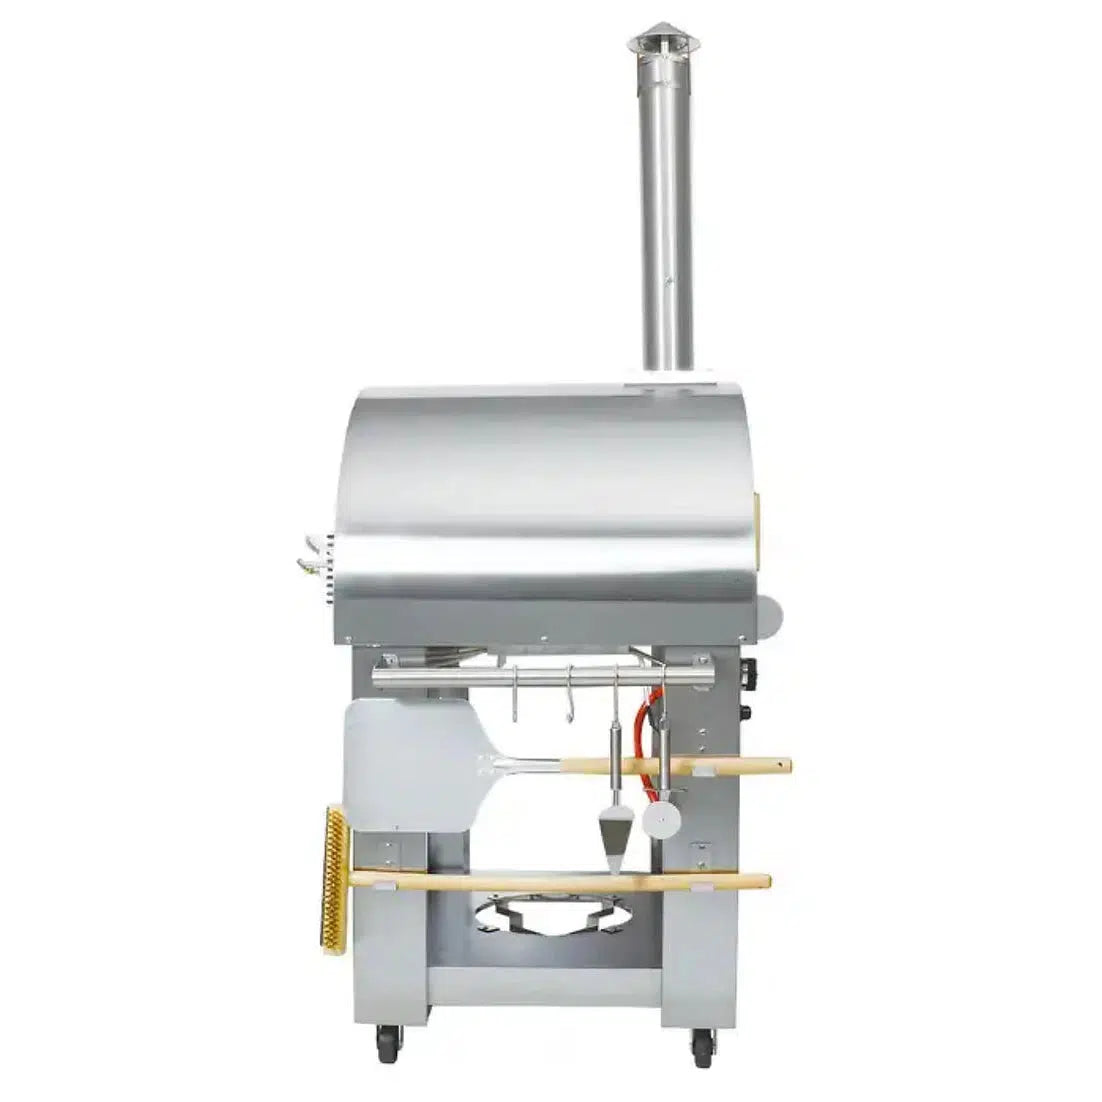 Kokomo Grills 32" Dual Fuel Natural Gas or Wood Fired Stainless Steel Pizza Oven